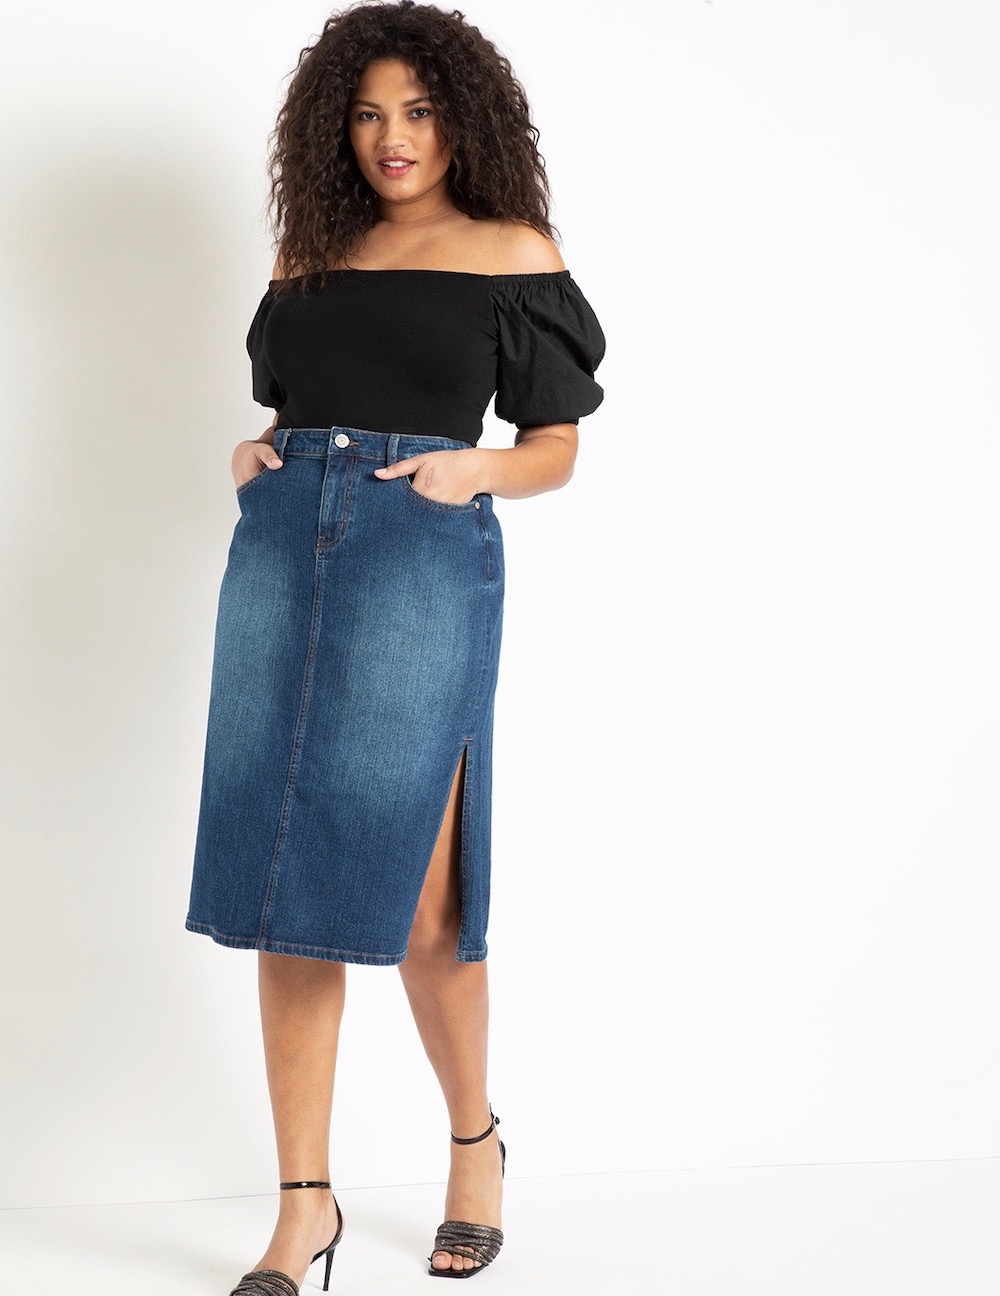 Denim Skirts Totally Worth Trading in Your Jeans For - theFashionSpot